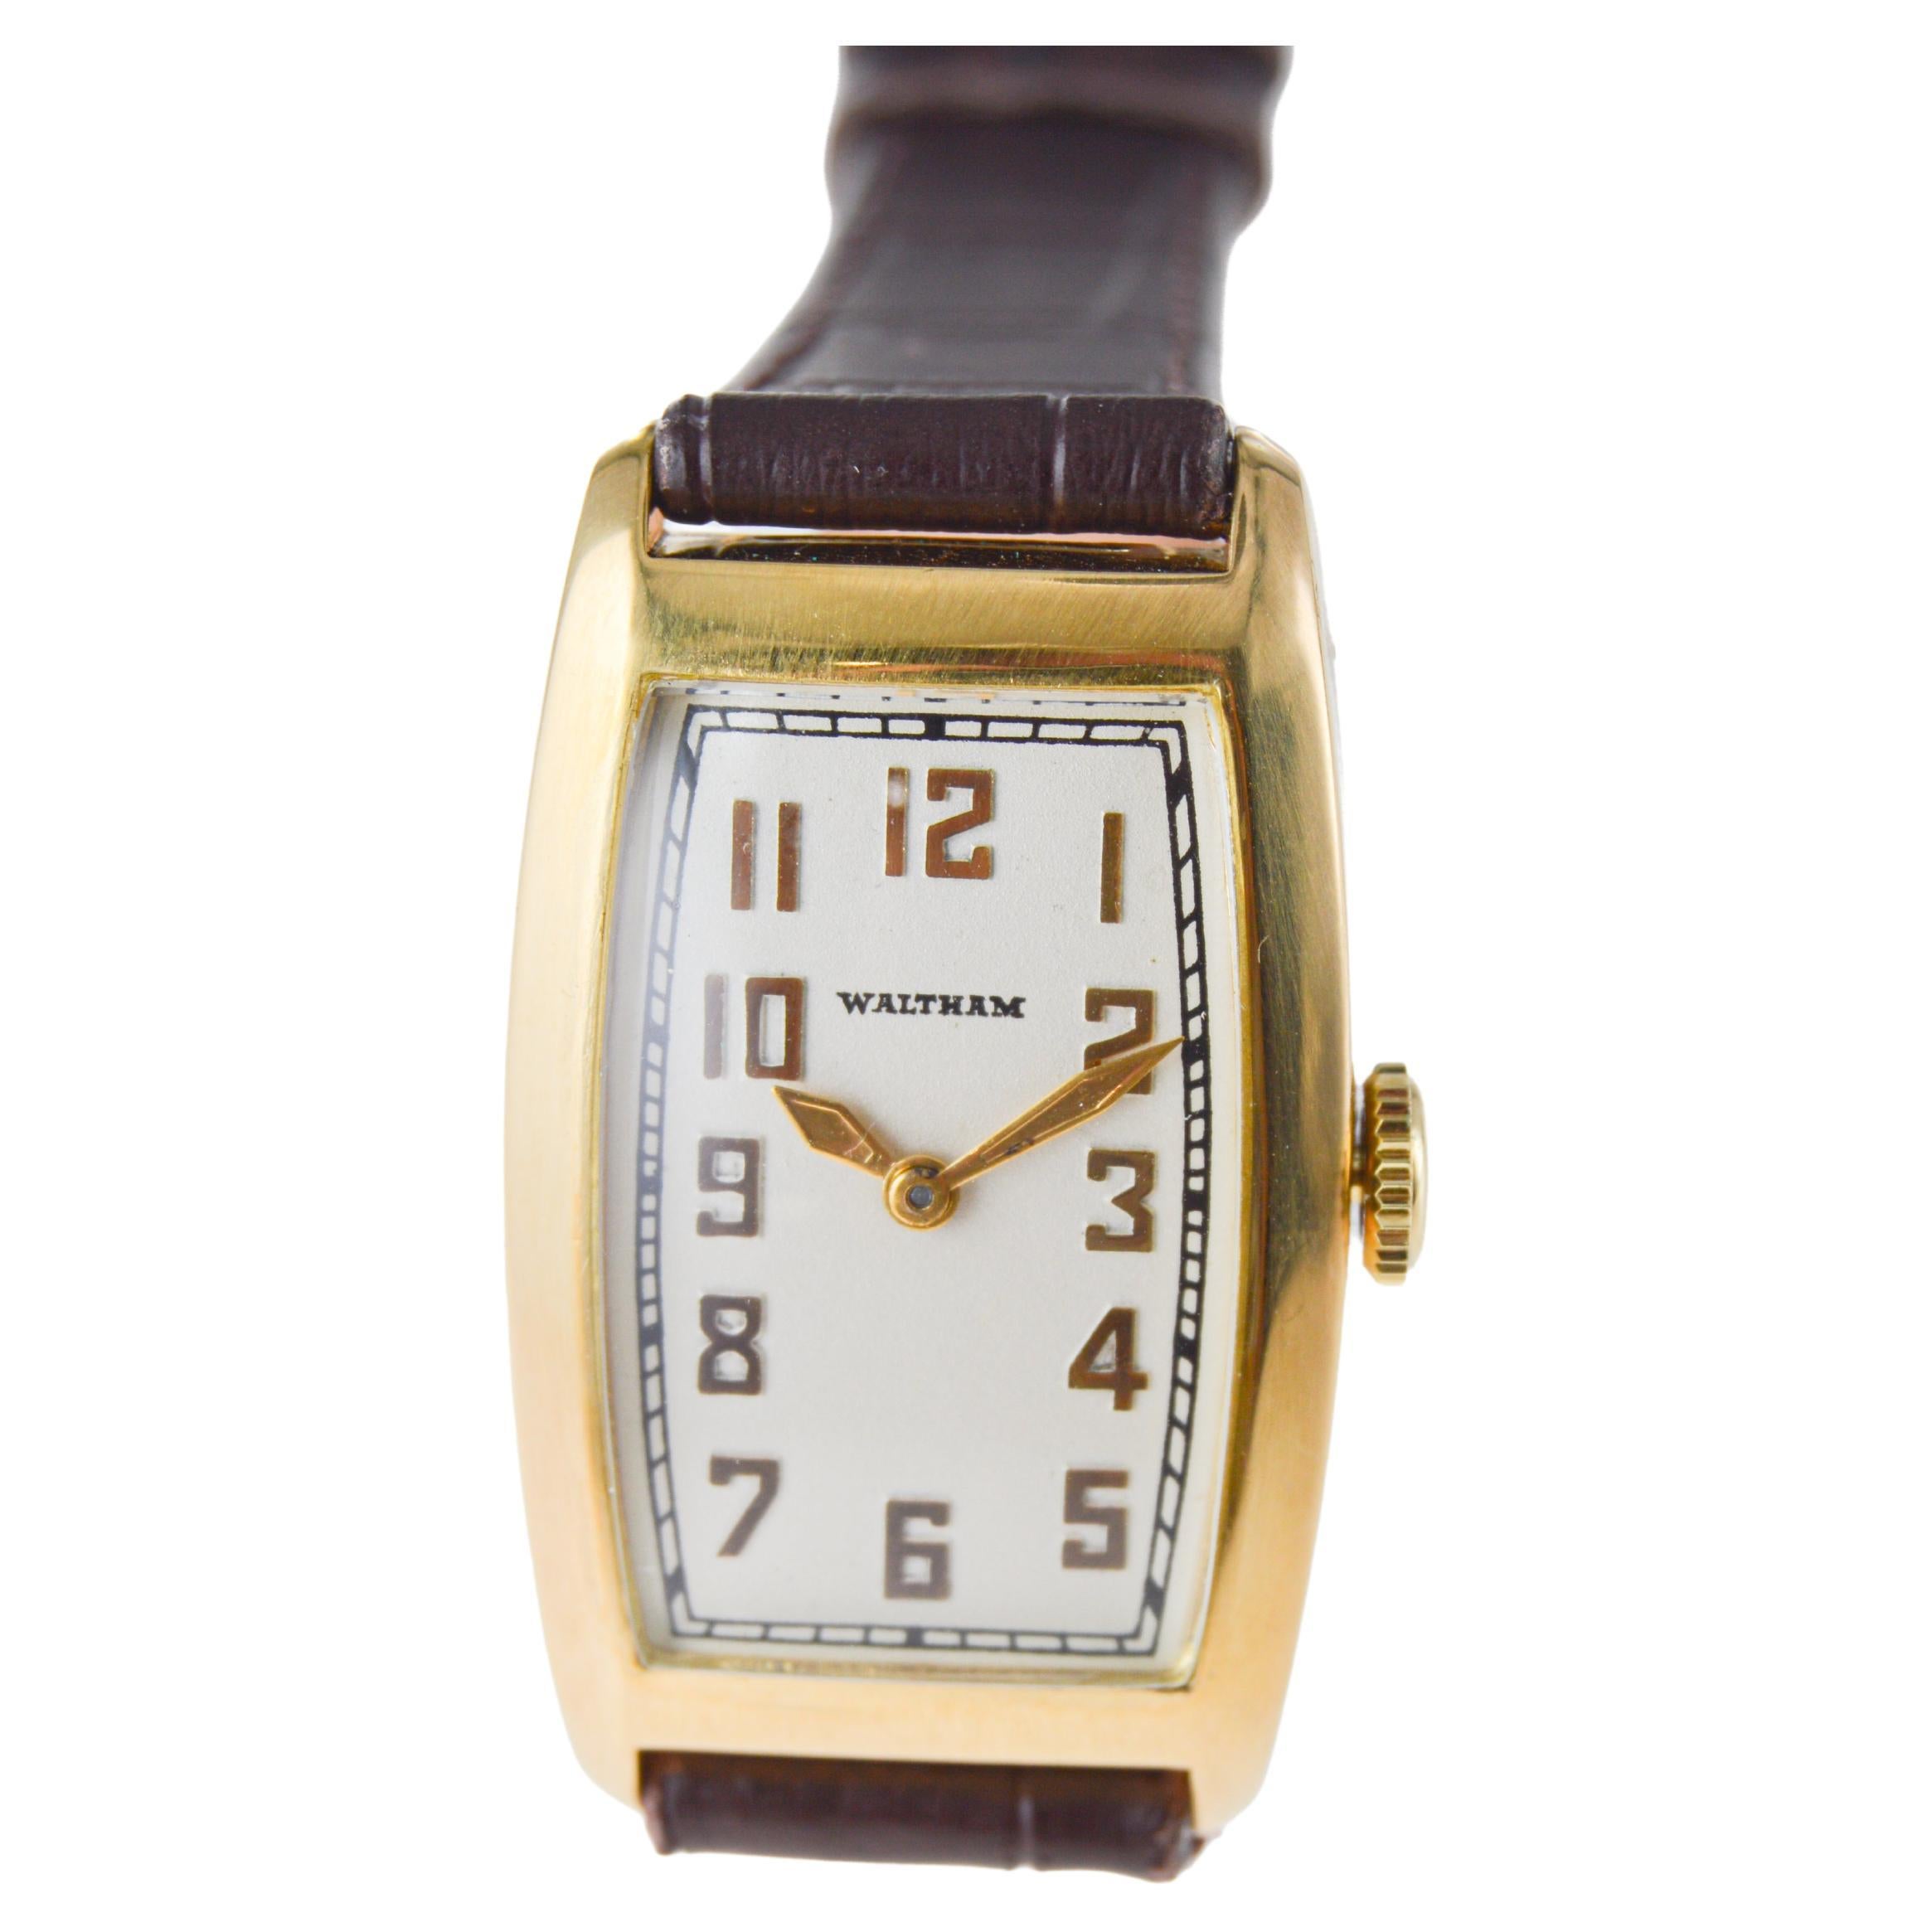 Waltham Gold Filled Art Deco Tonneau Watch with Flawless Original Dial From 1934 For Sale 2